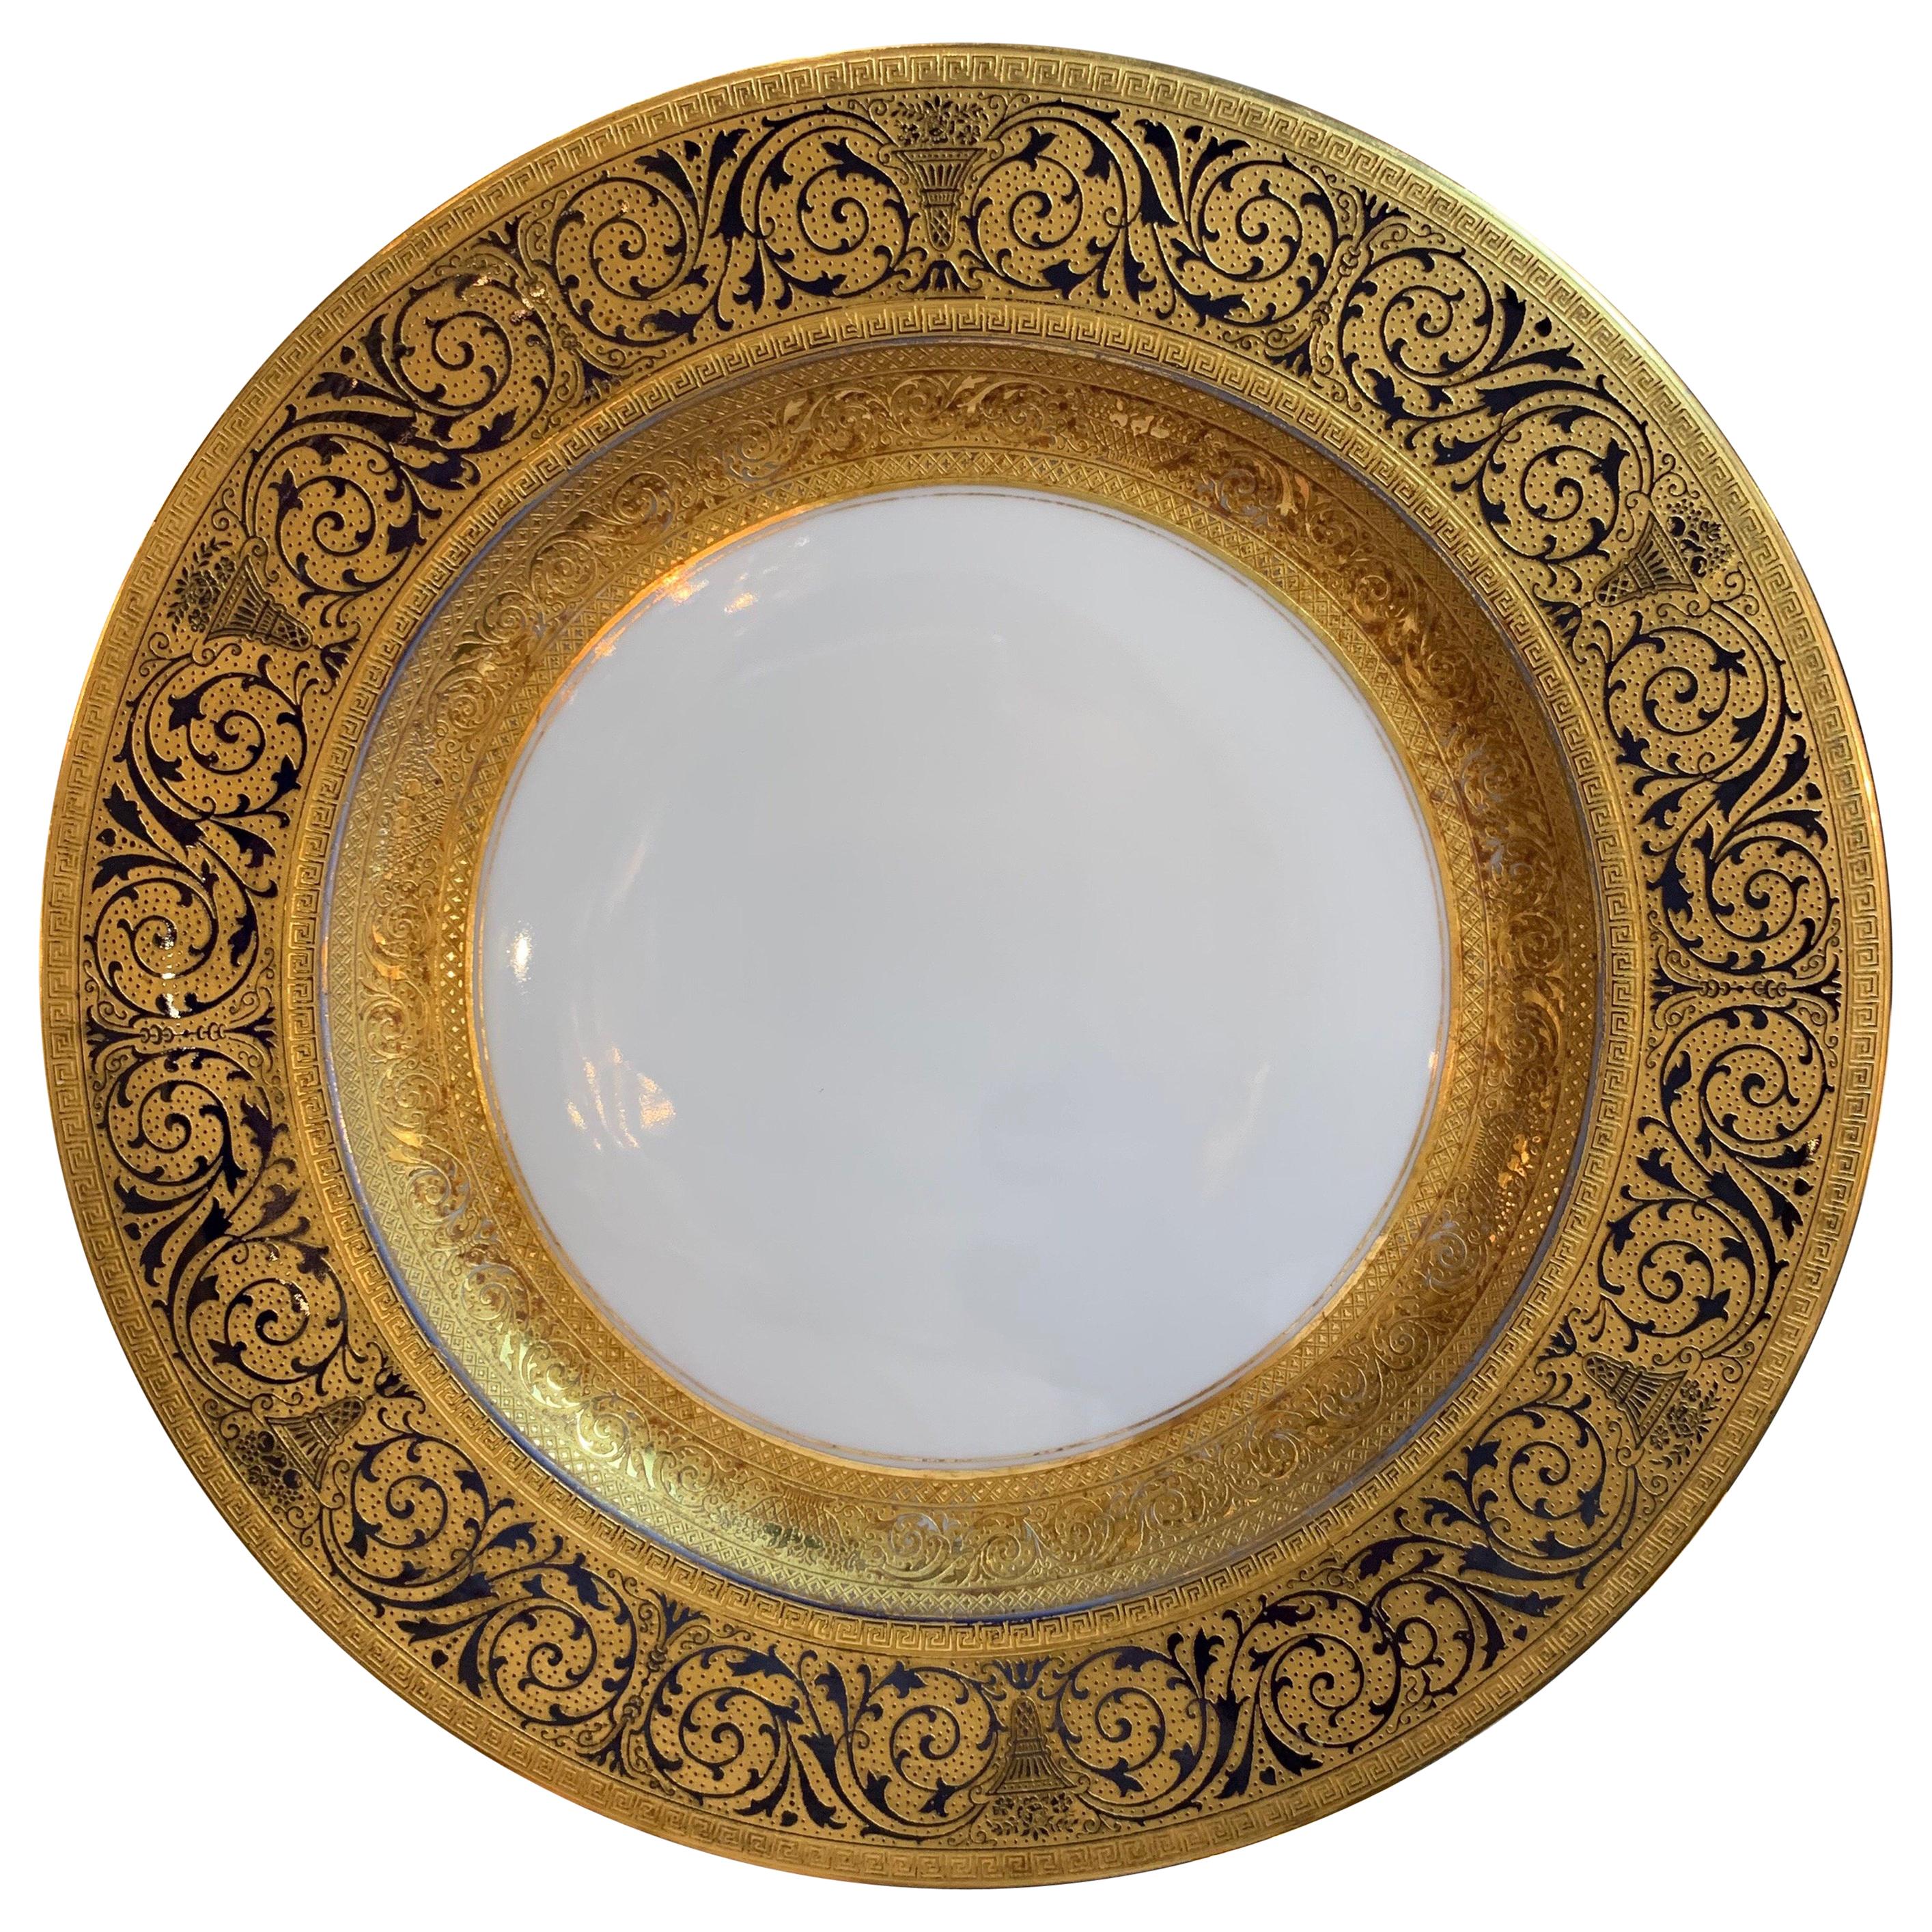 Set of 12 Bavarian China Dinner Plates with Raised 24 Carat Gold For Sale